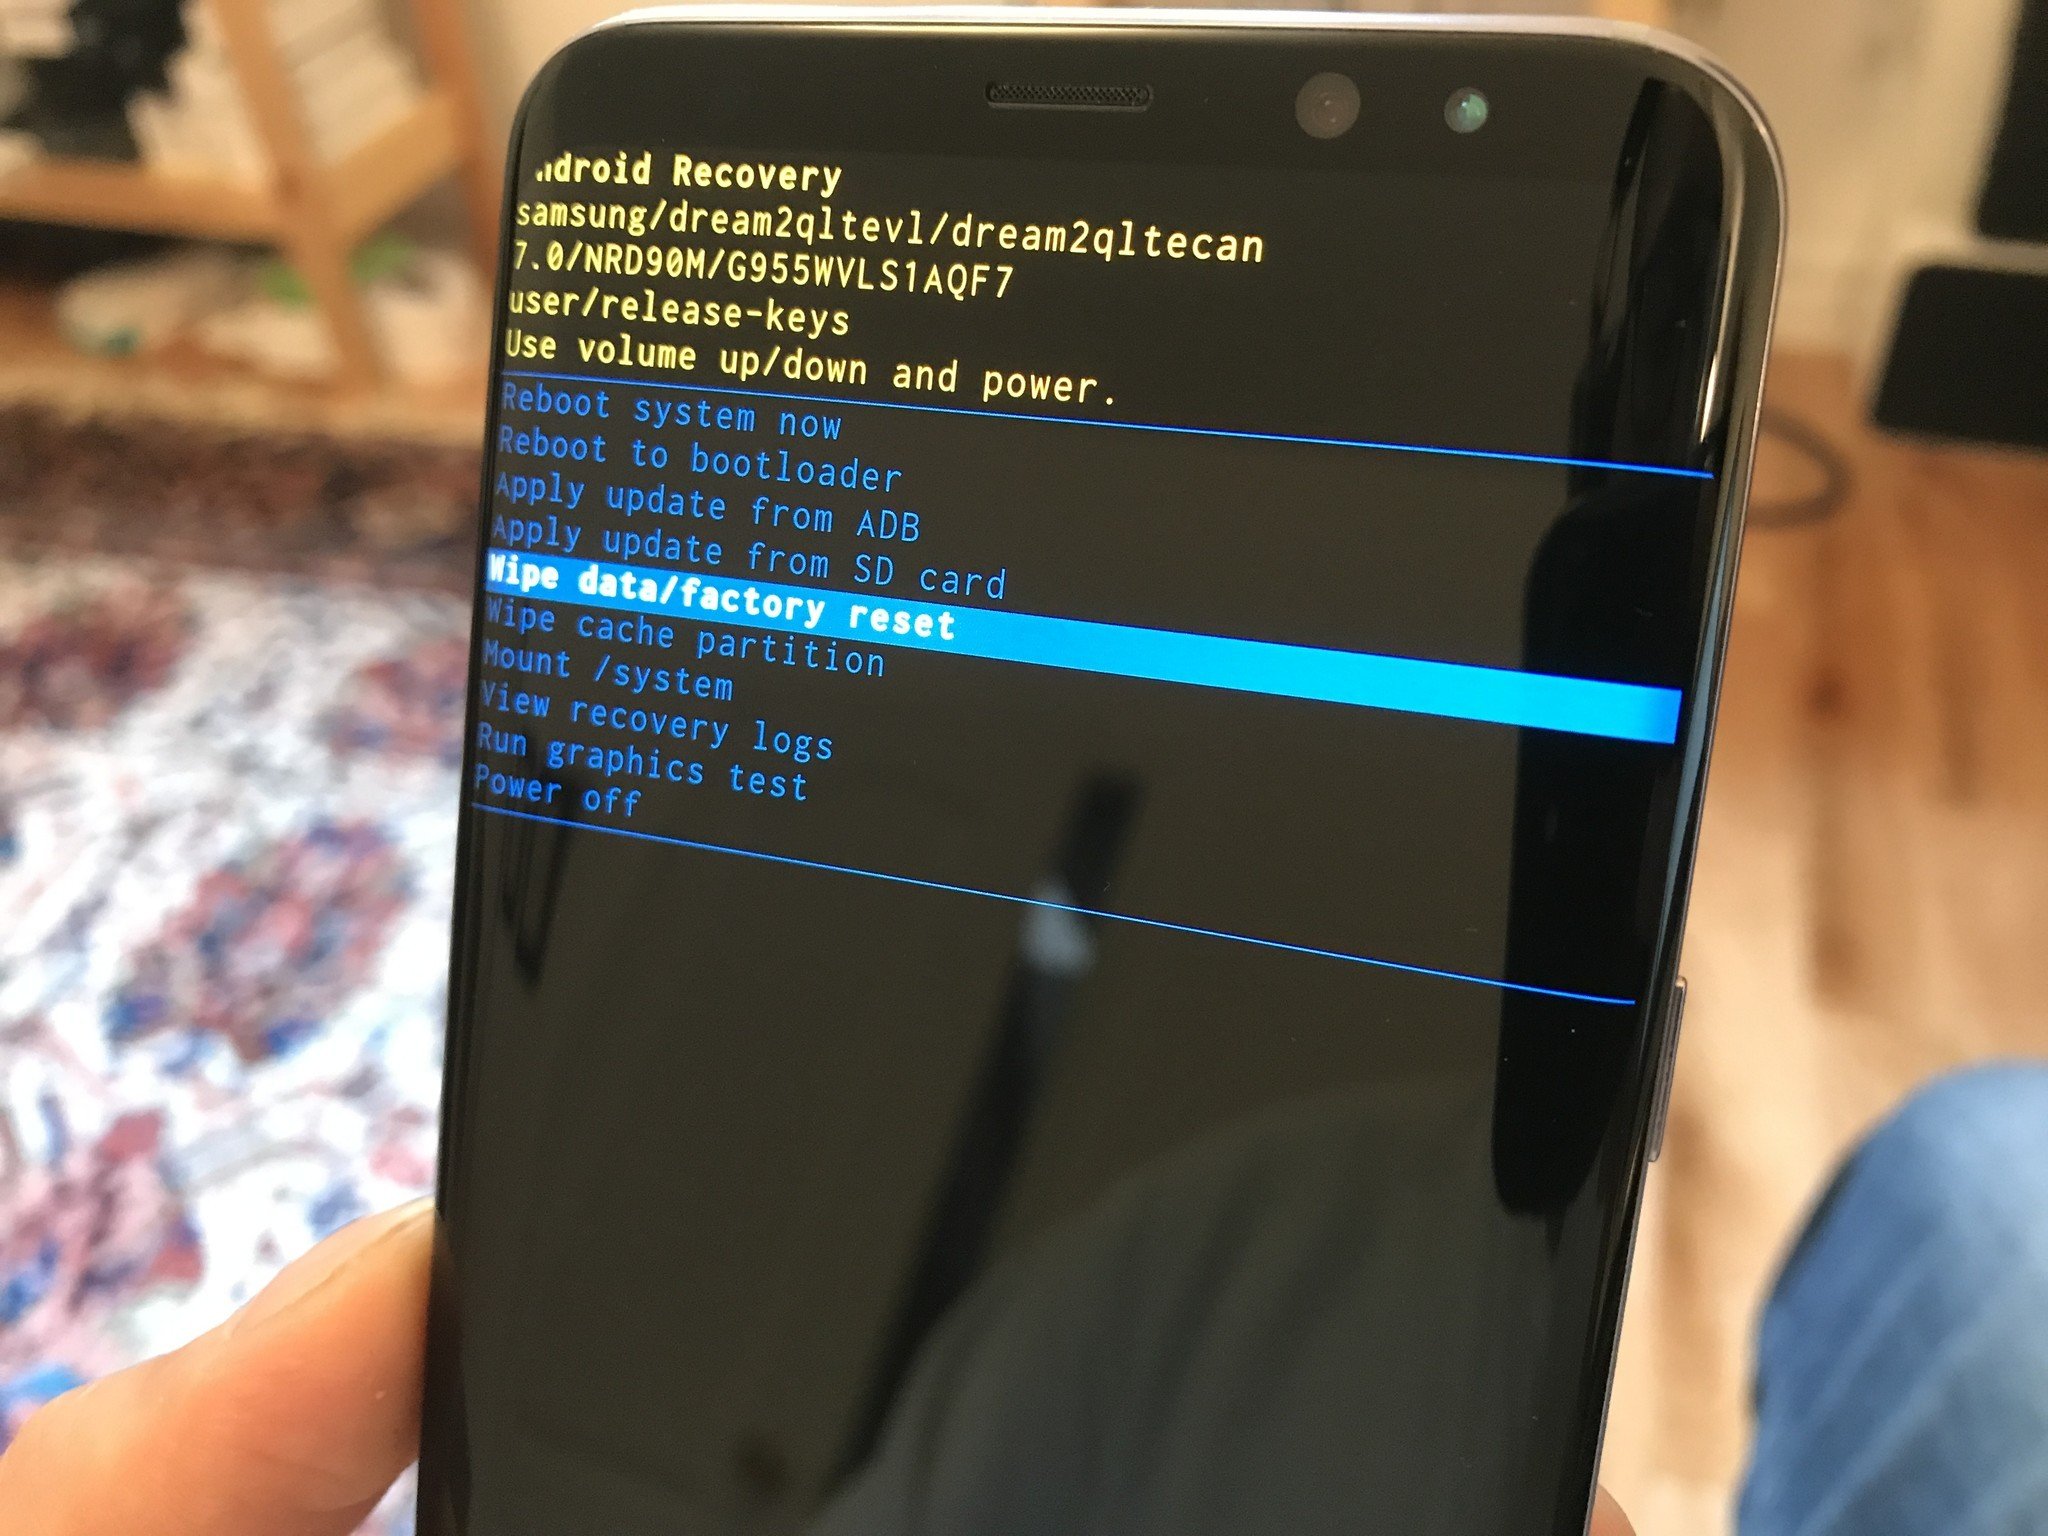 Samsung S8 Recovery Mode